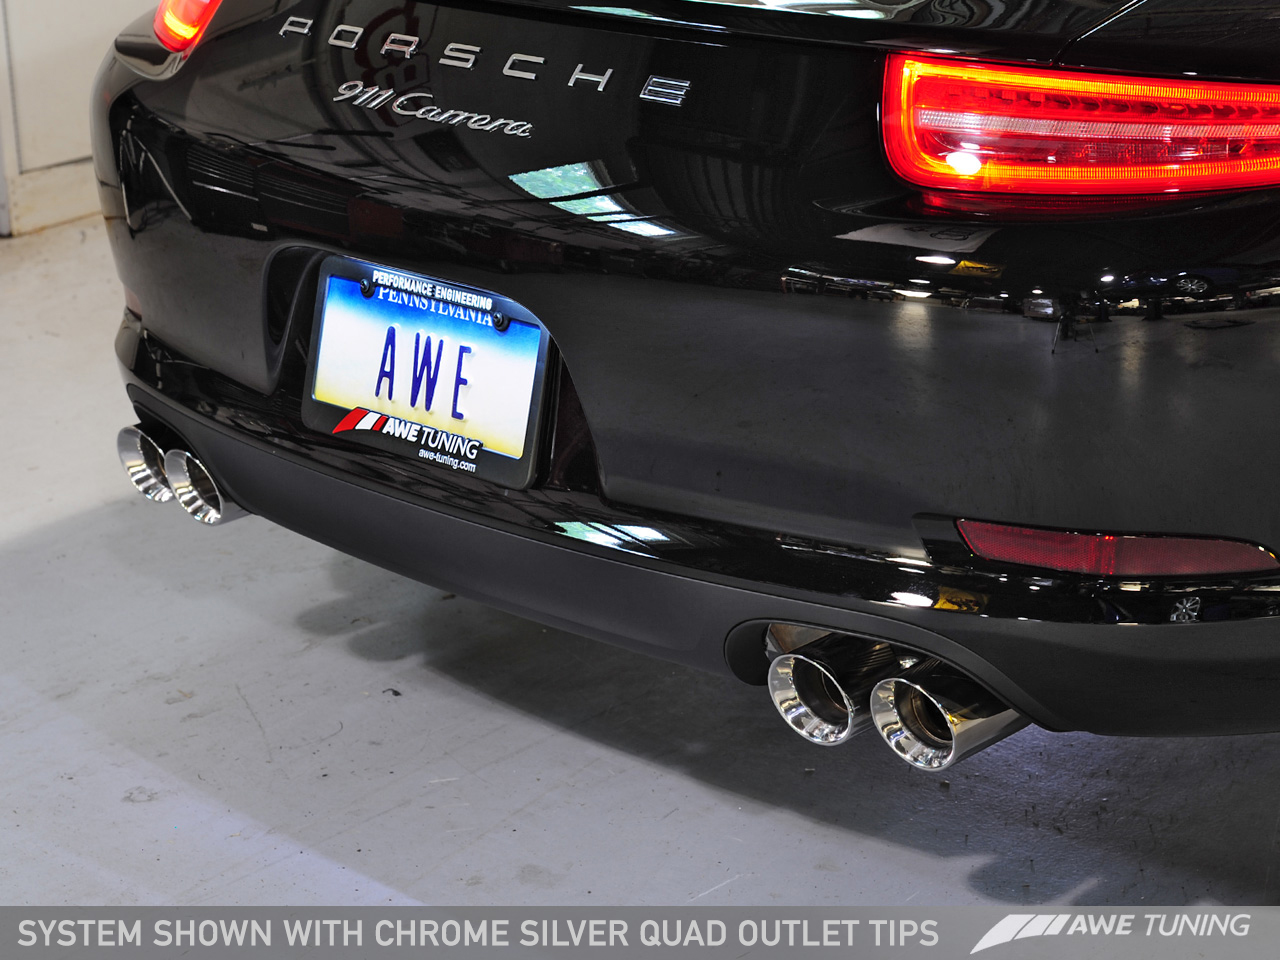 Performance Exhaust for 991 Carrera - Chrome Silver Tips